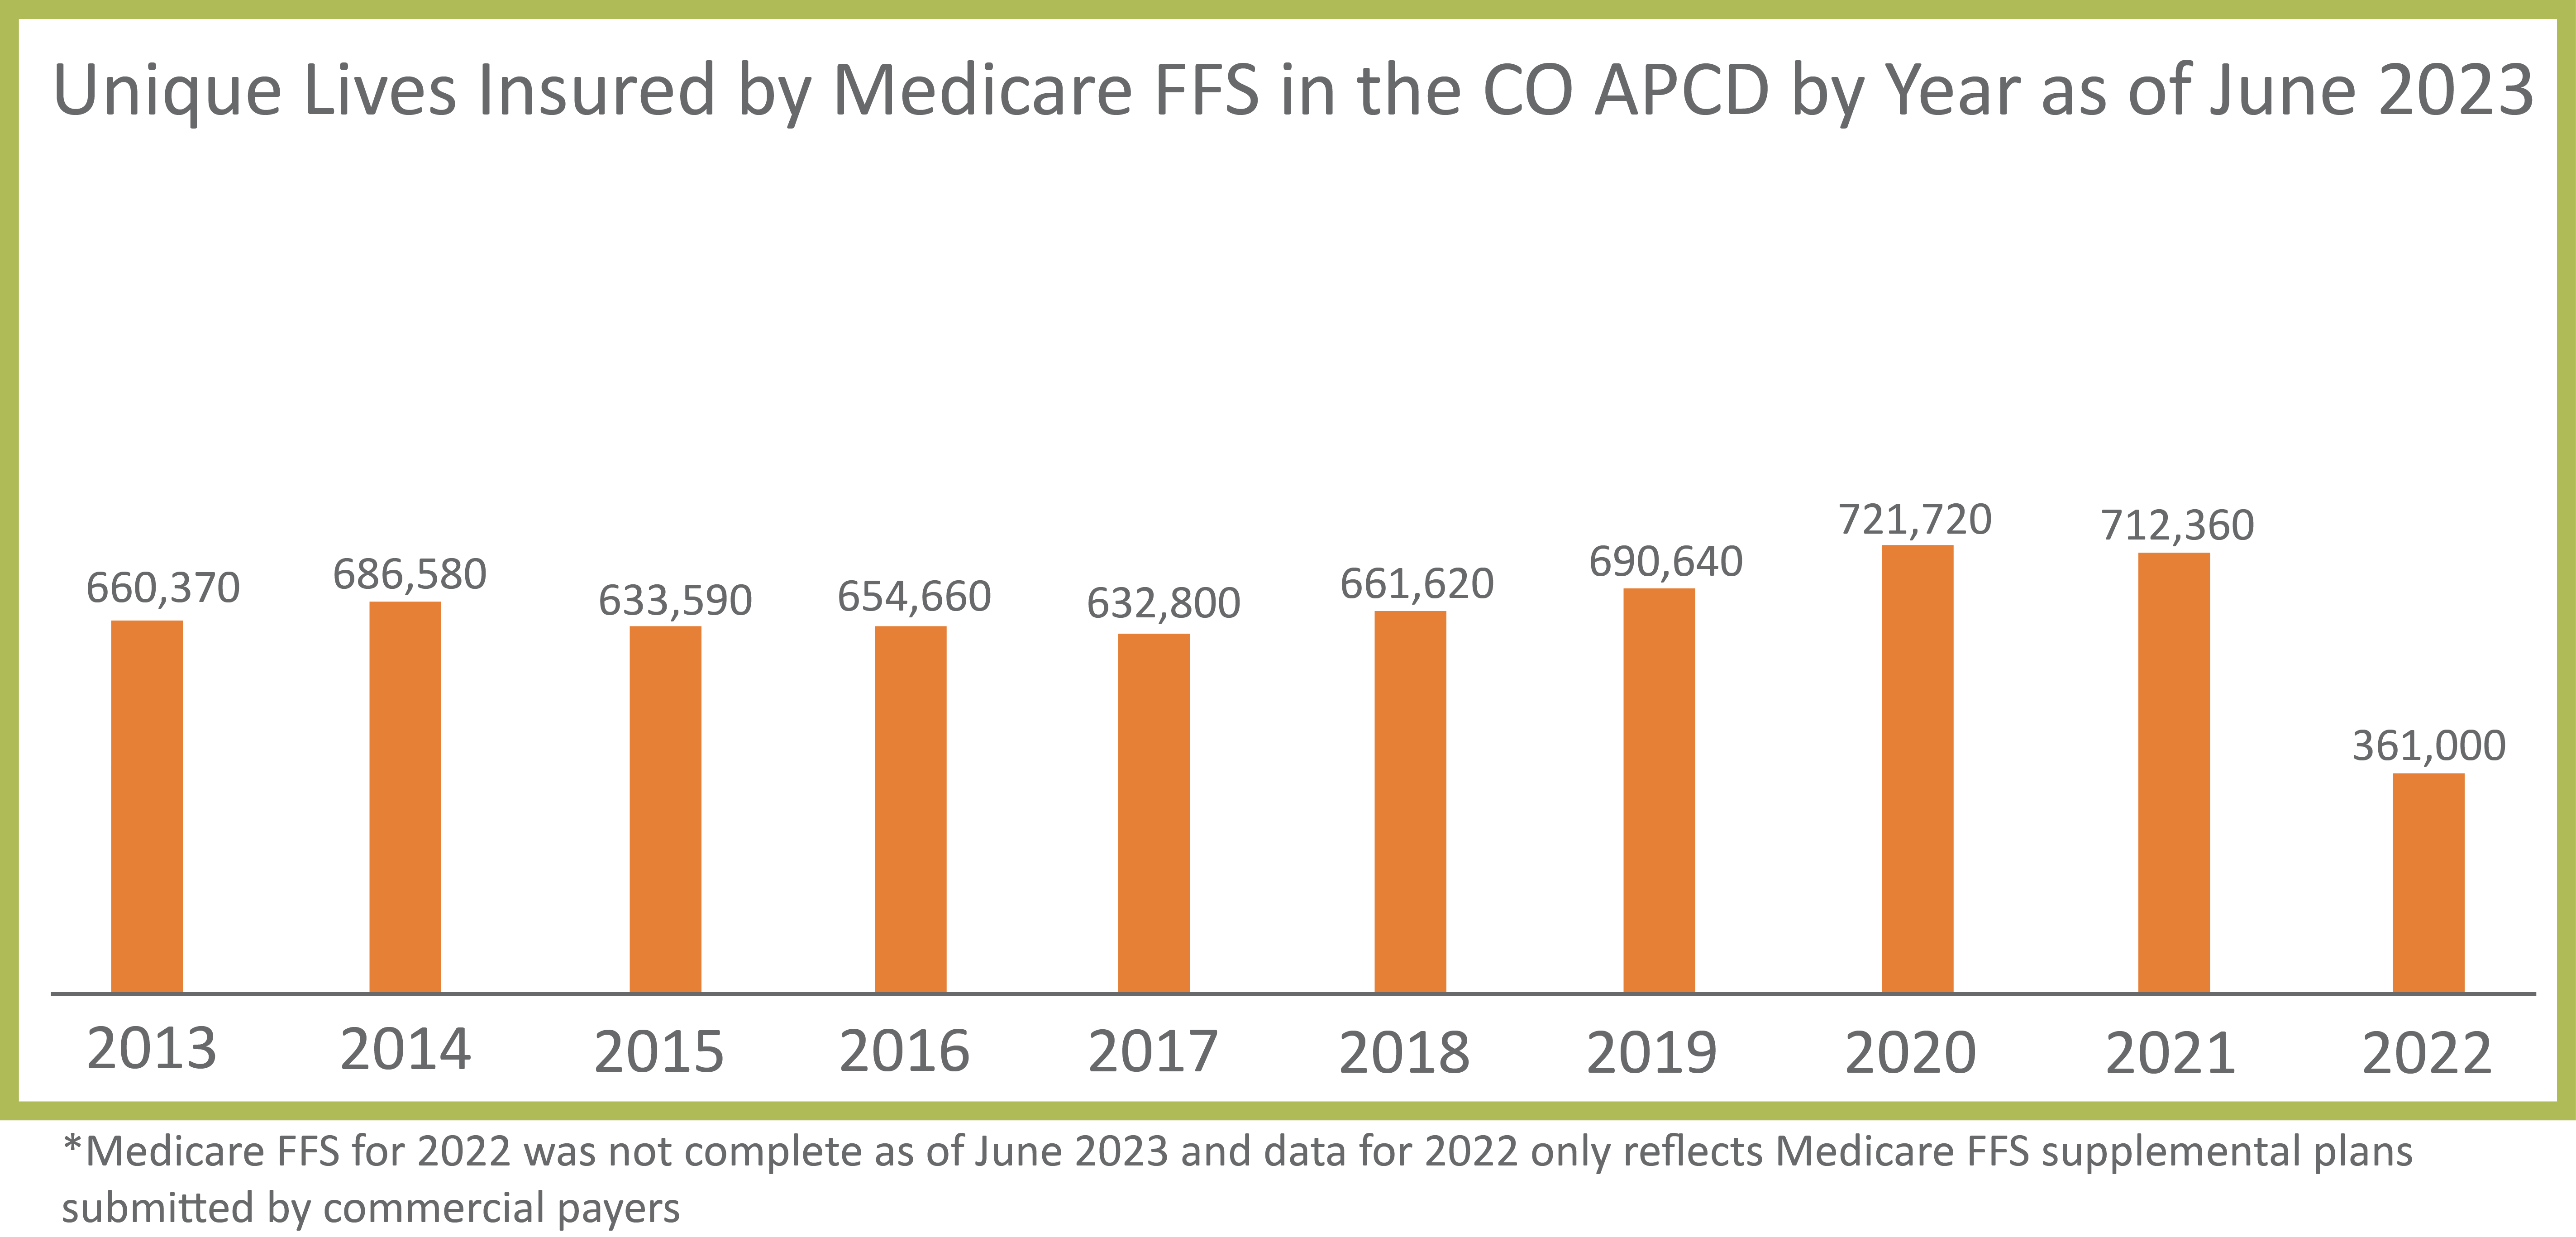 As of June 2023, there were 361,000 unique lives insured by Medicare FFS in the CO APCD 